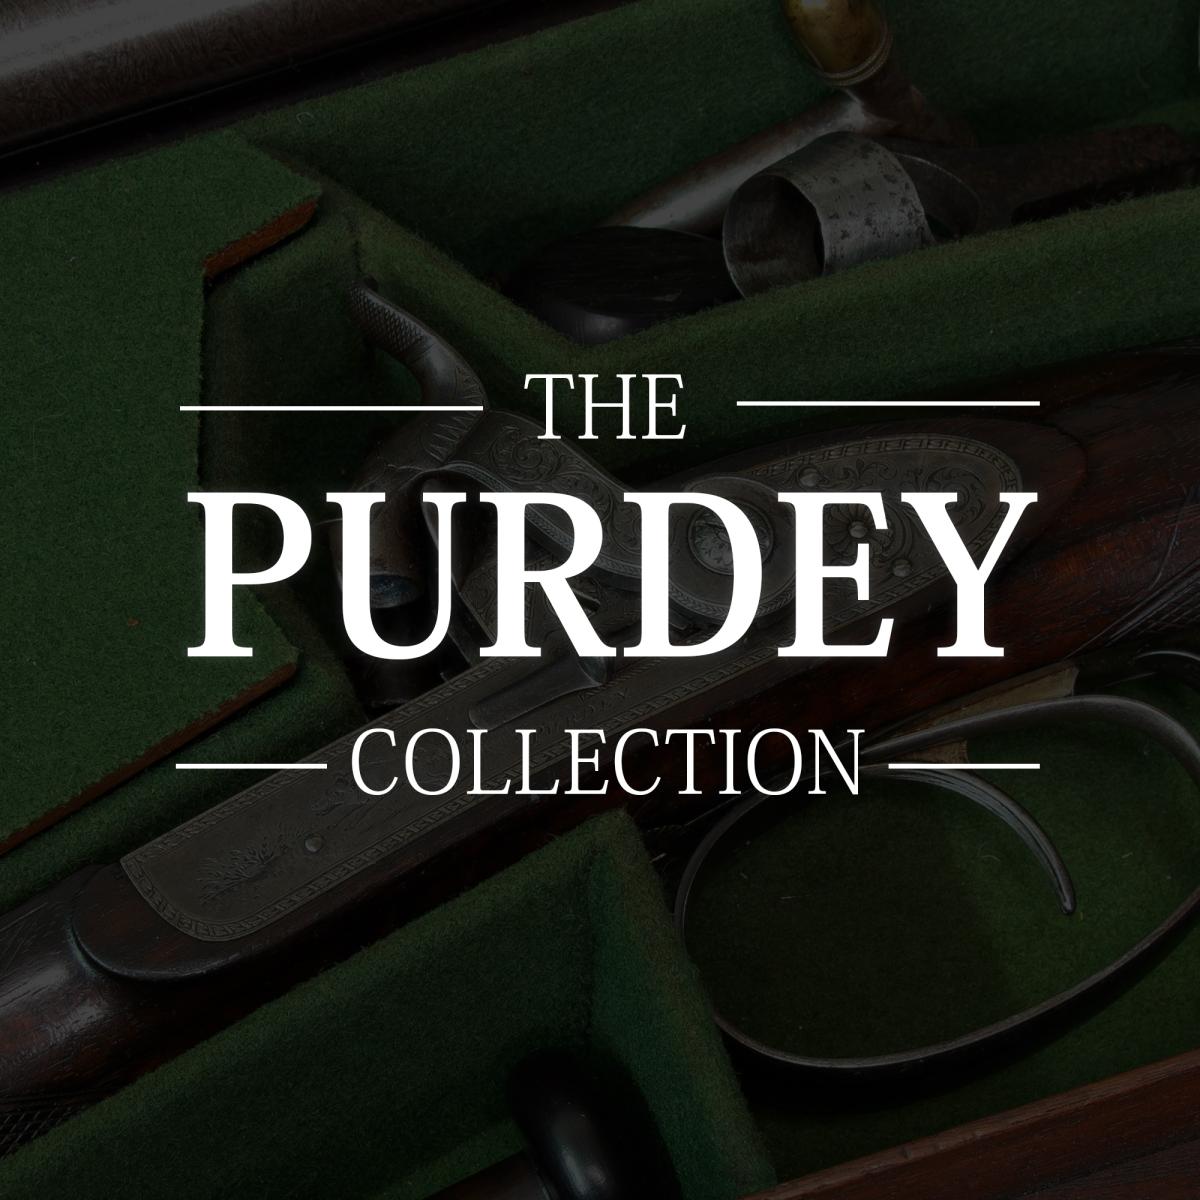 The Antique Purdey Collection at Henry Krank